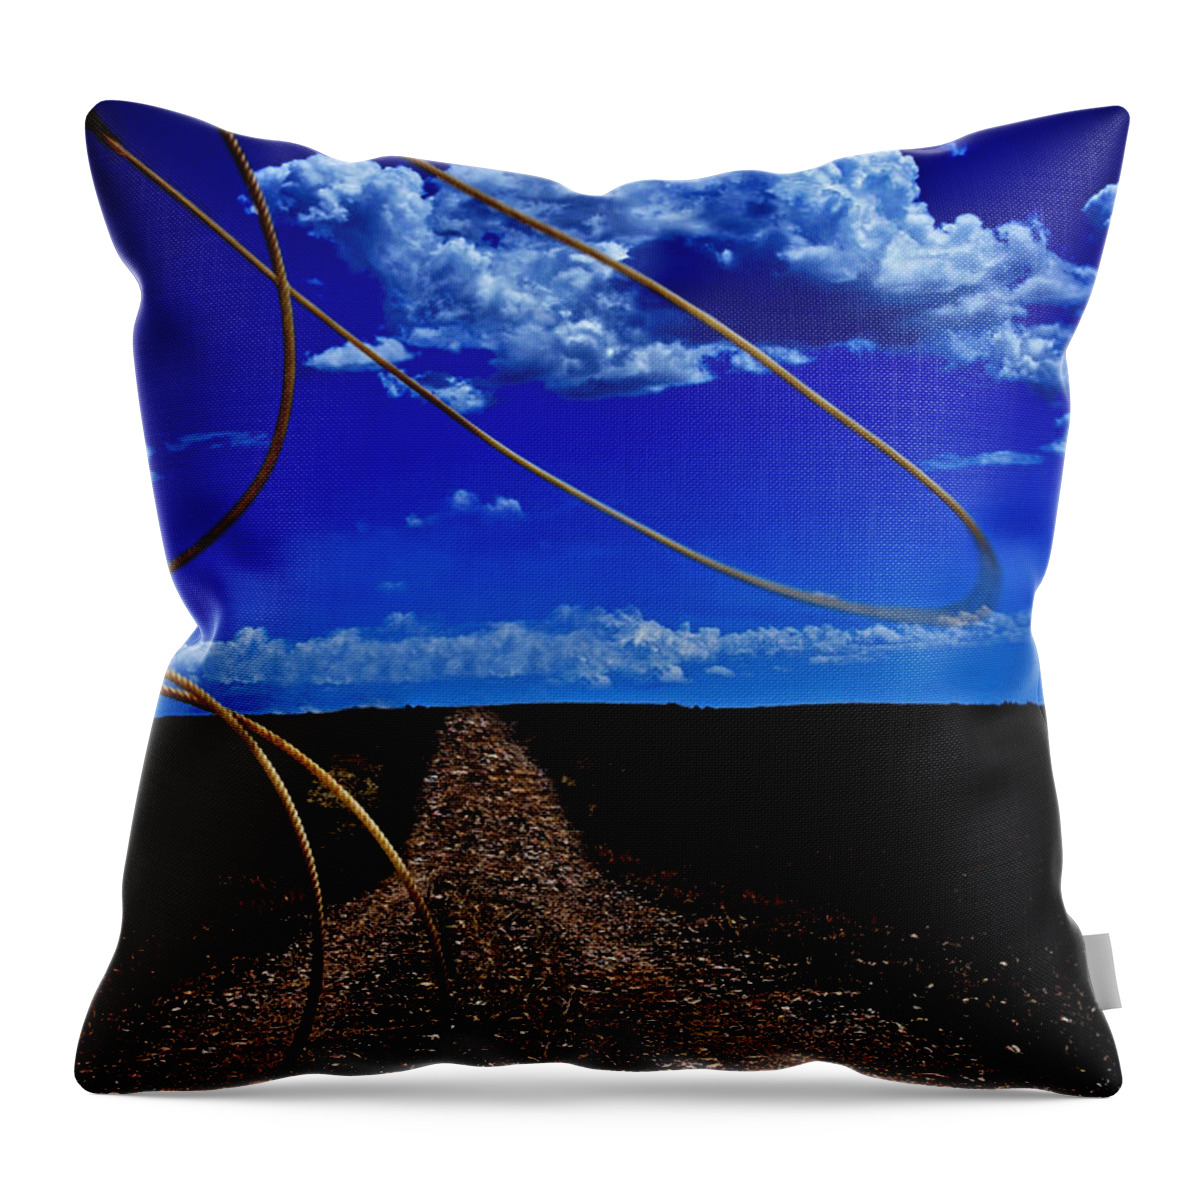 Western Throw Pillow featuring the photograph Rope The Road Ahead by Amanda Smith